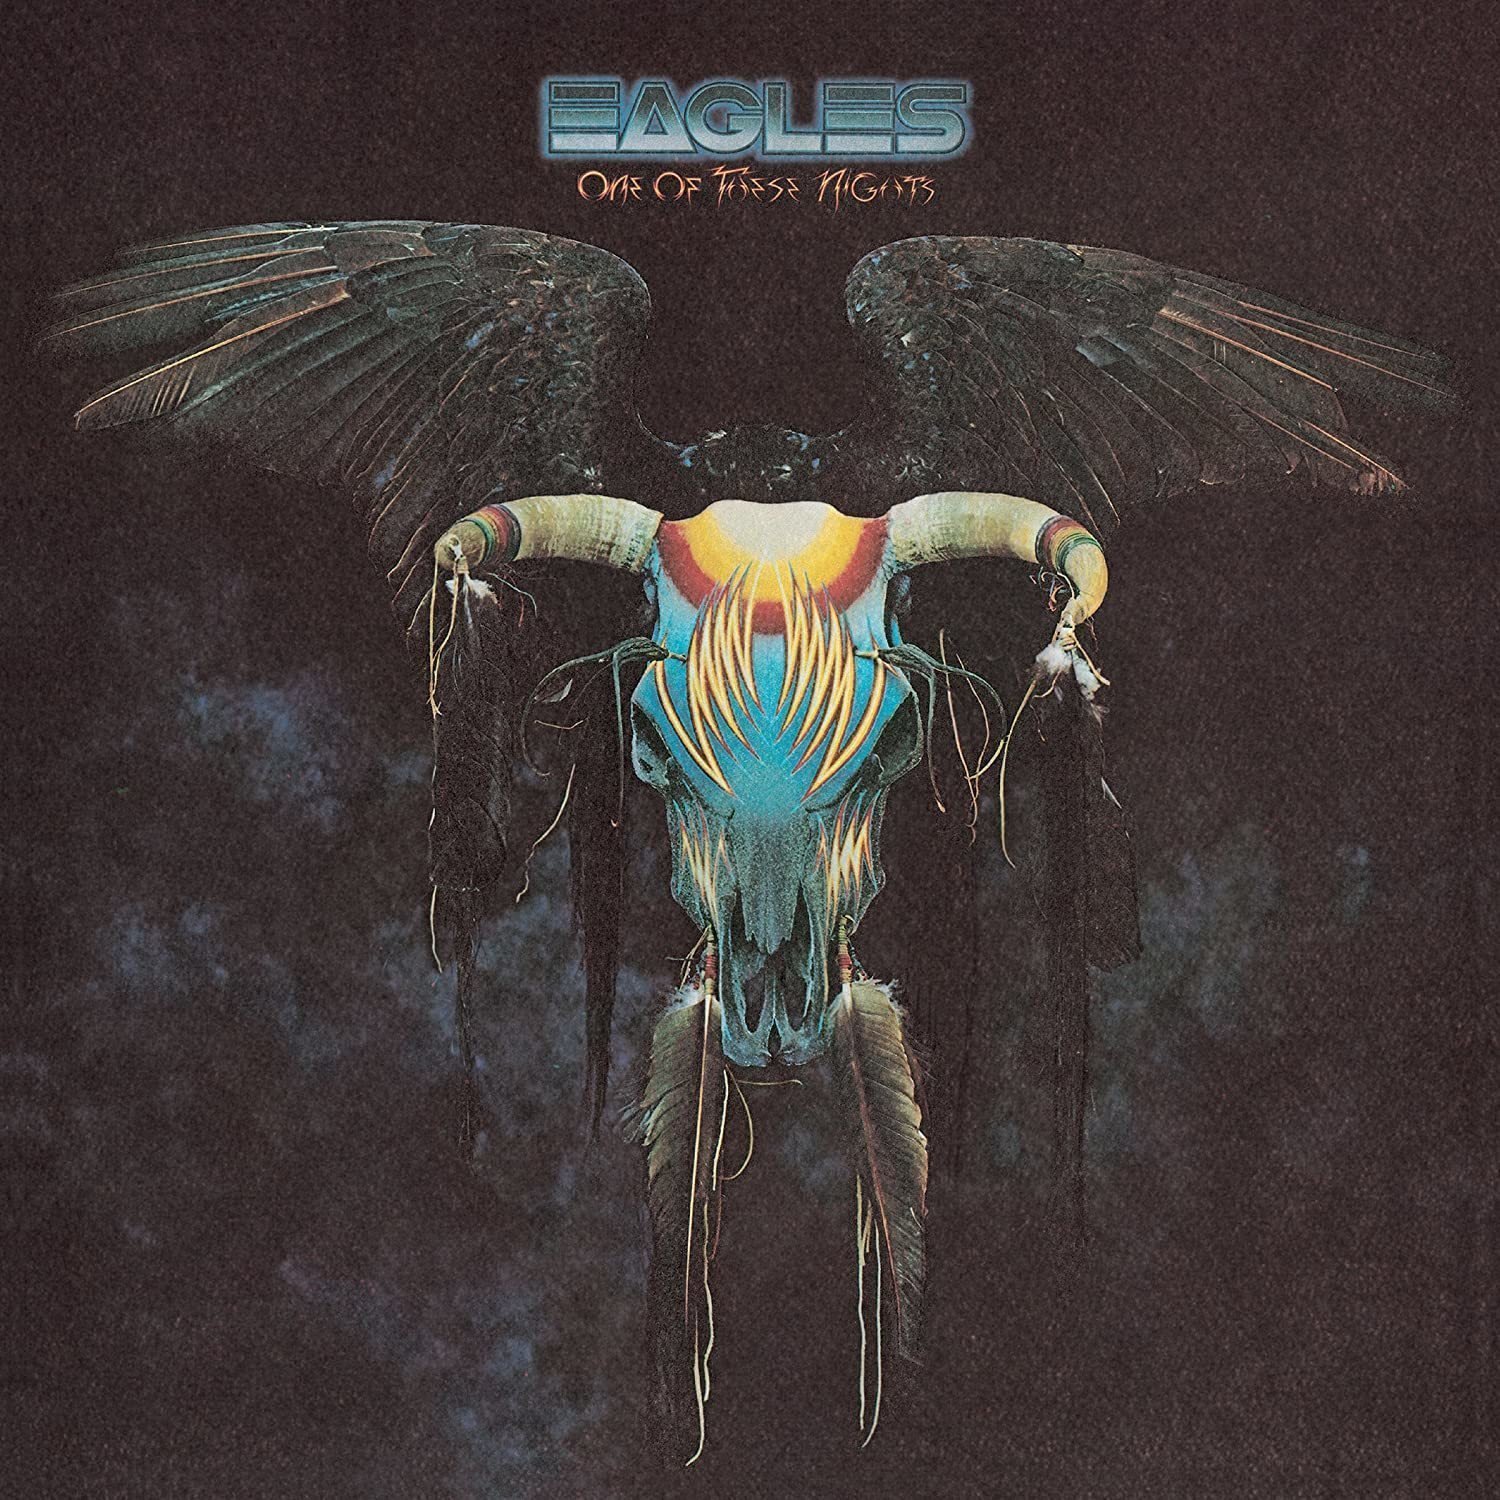 Vinyl Record Eagles - One Of These Nights (LP)